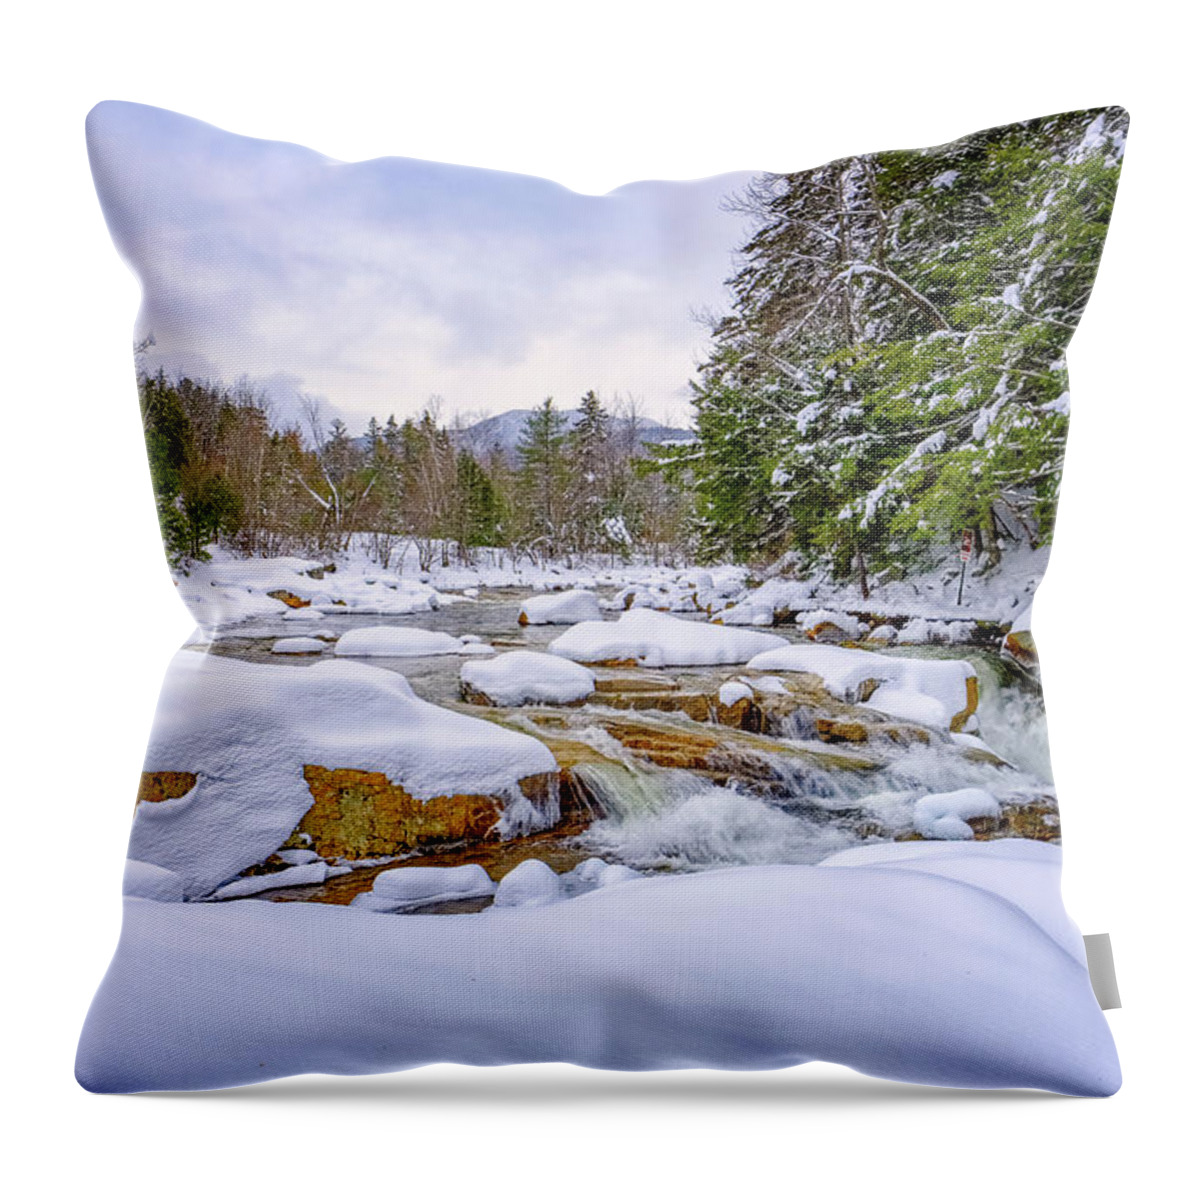 Snow Throw Pillow featuring the photograph Winter On The Swift River. by Jeff Sinon